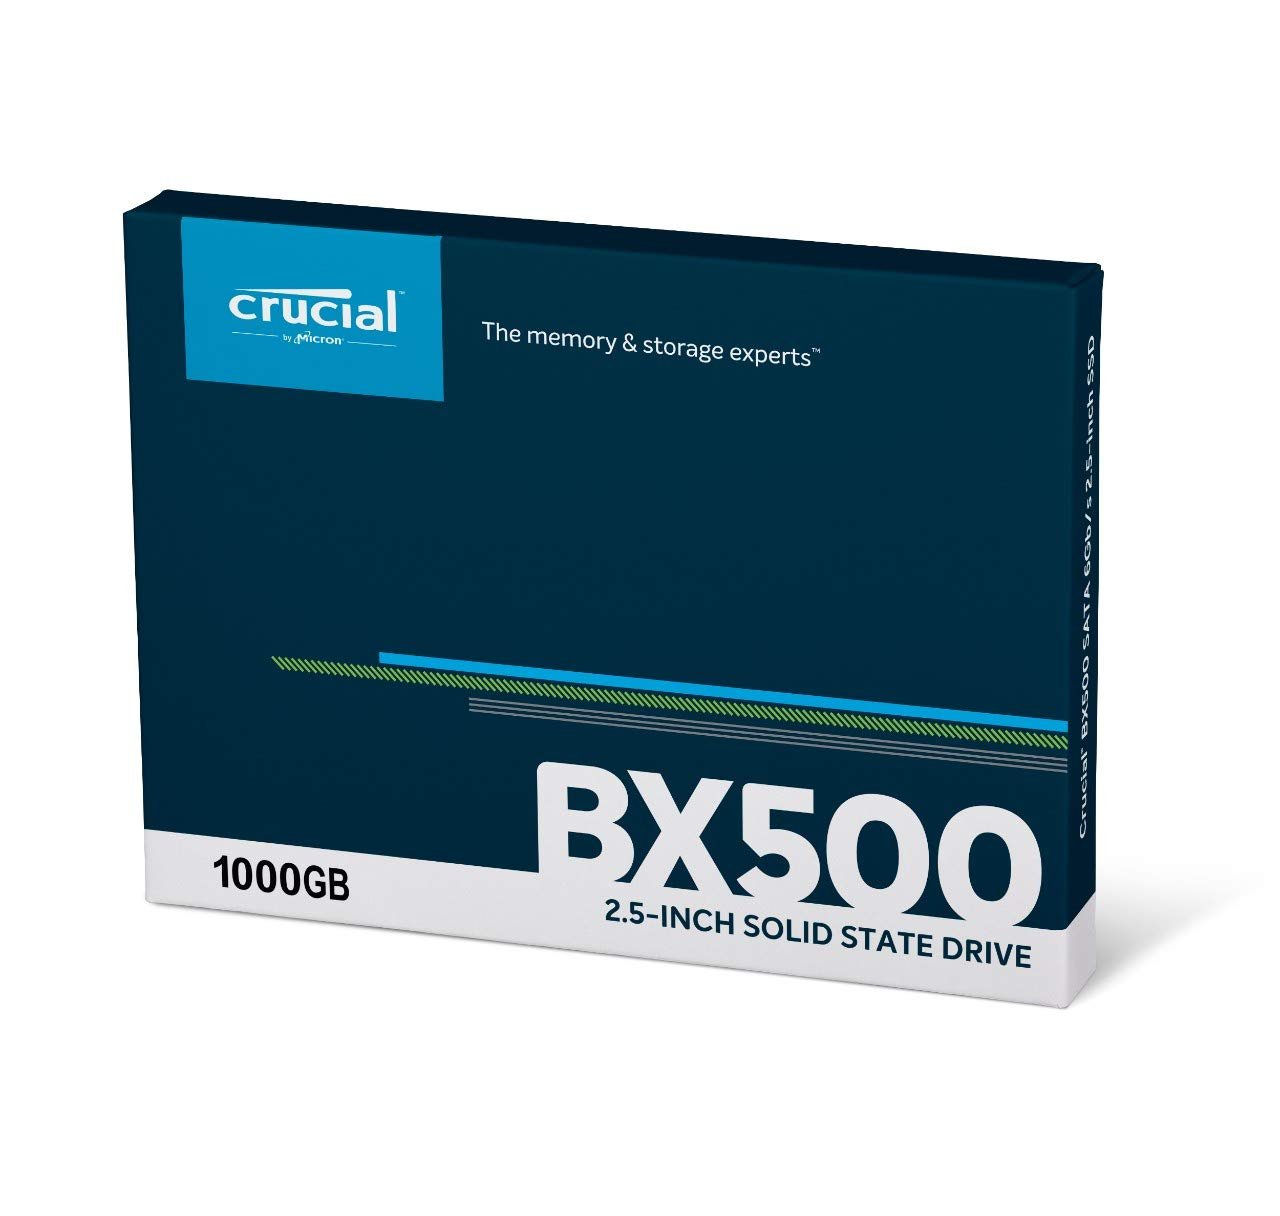 Crucial® BX500 1000GB 1TB SATA 2.5 inch SSD - I Gaming Computer | Australia Wide Shipping | Buy now, Pay Later with Afterpay, Klarna, Zip, Latitude & Paypal